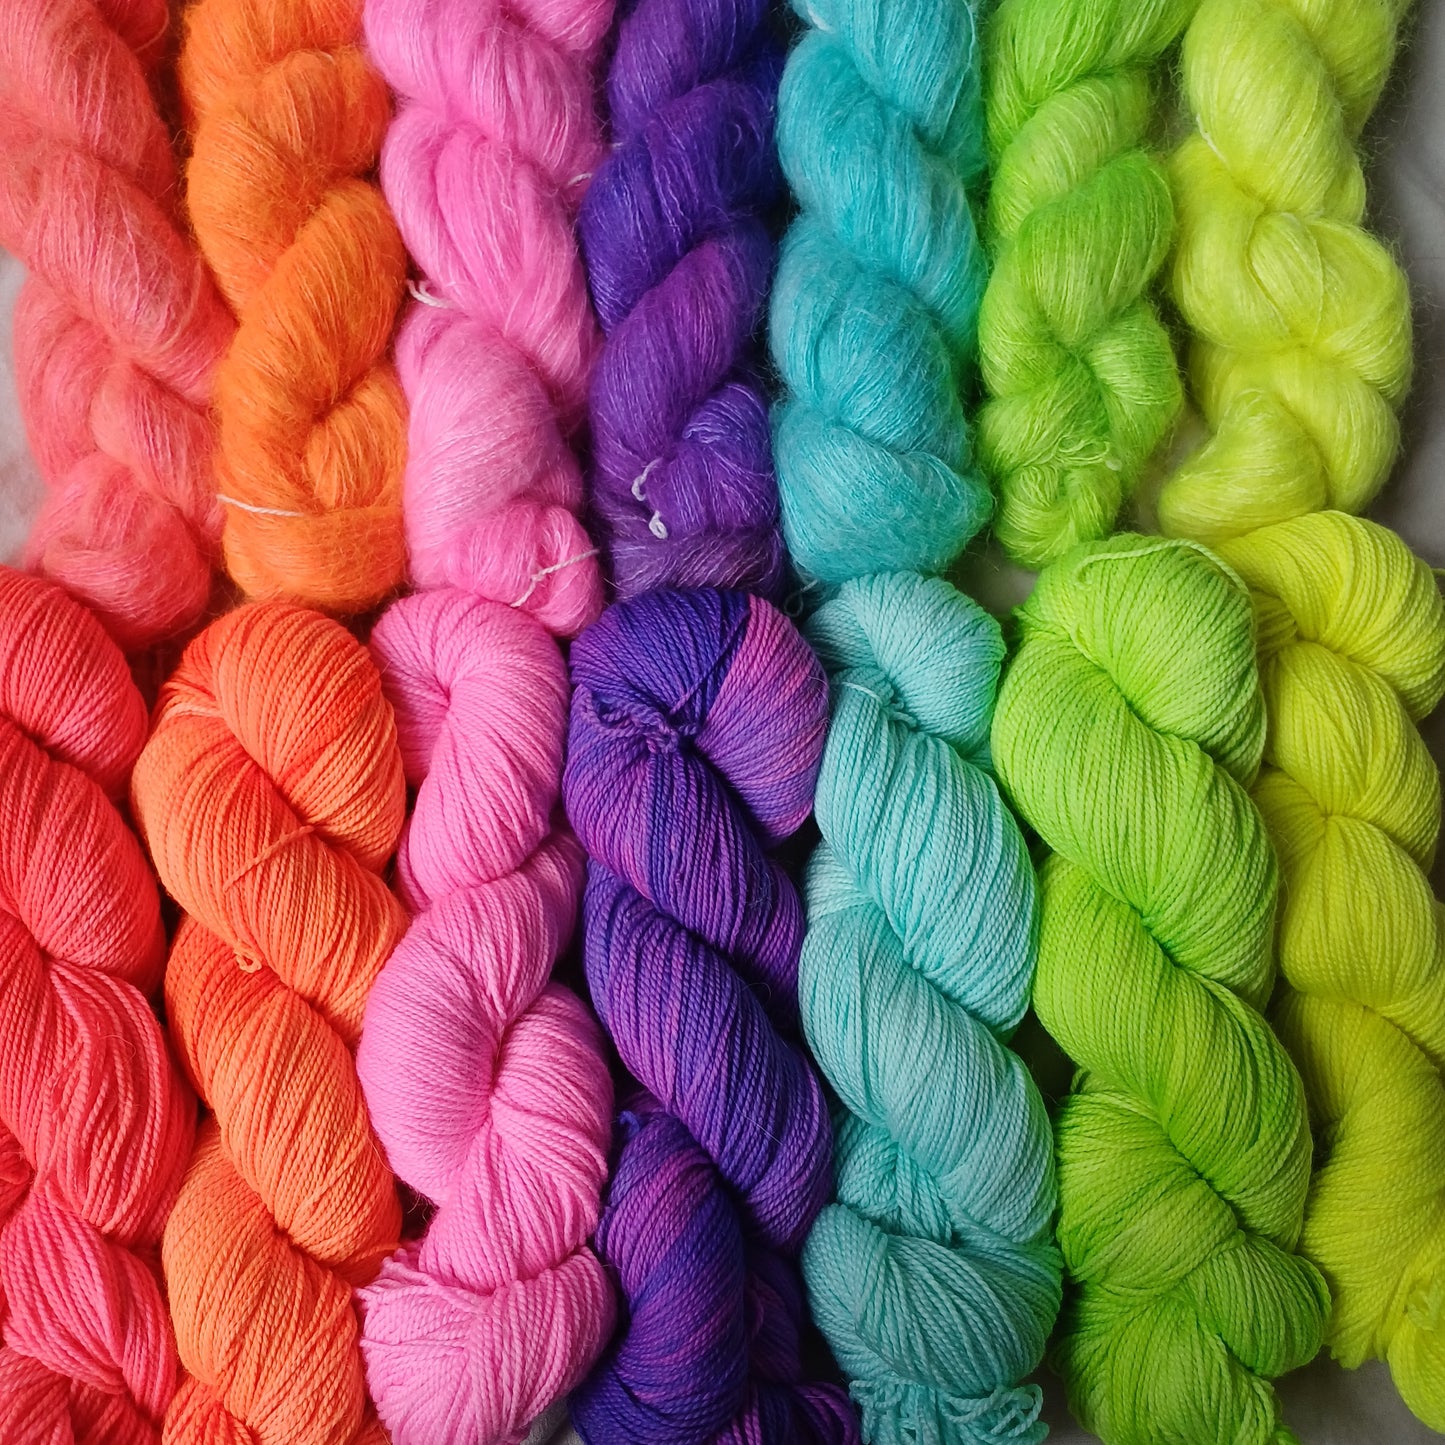 The Neon Edit "Safety Vest" in Frog Mouse Twisty Sock